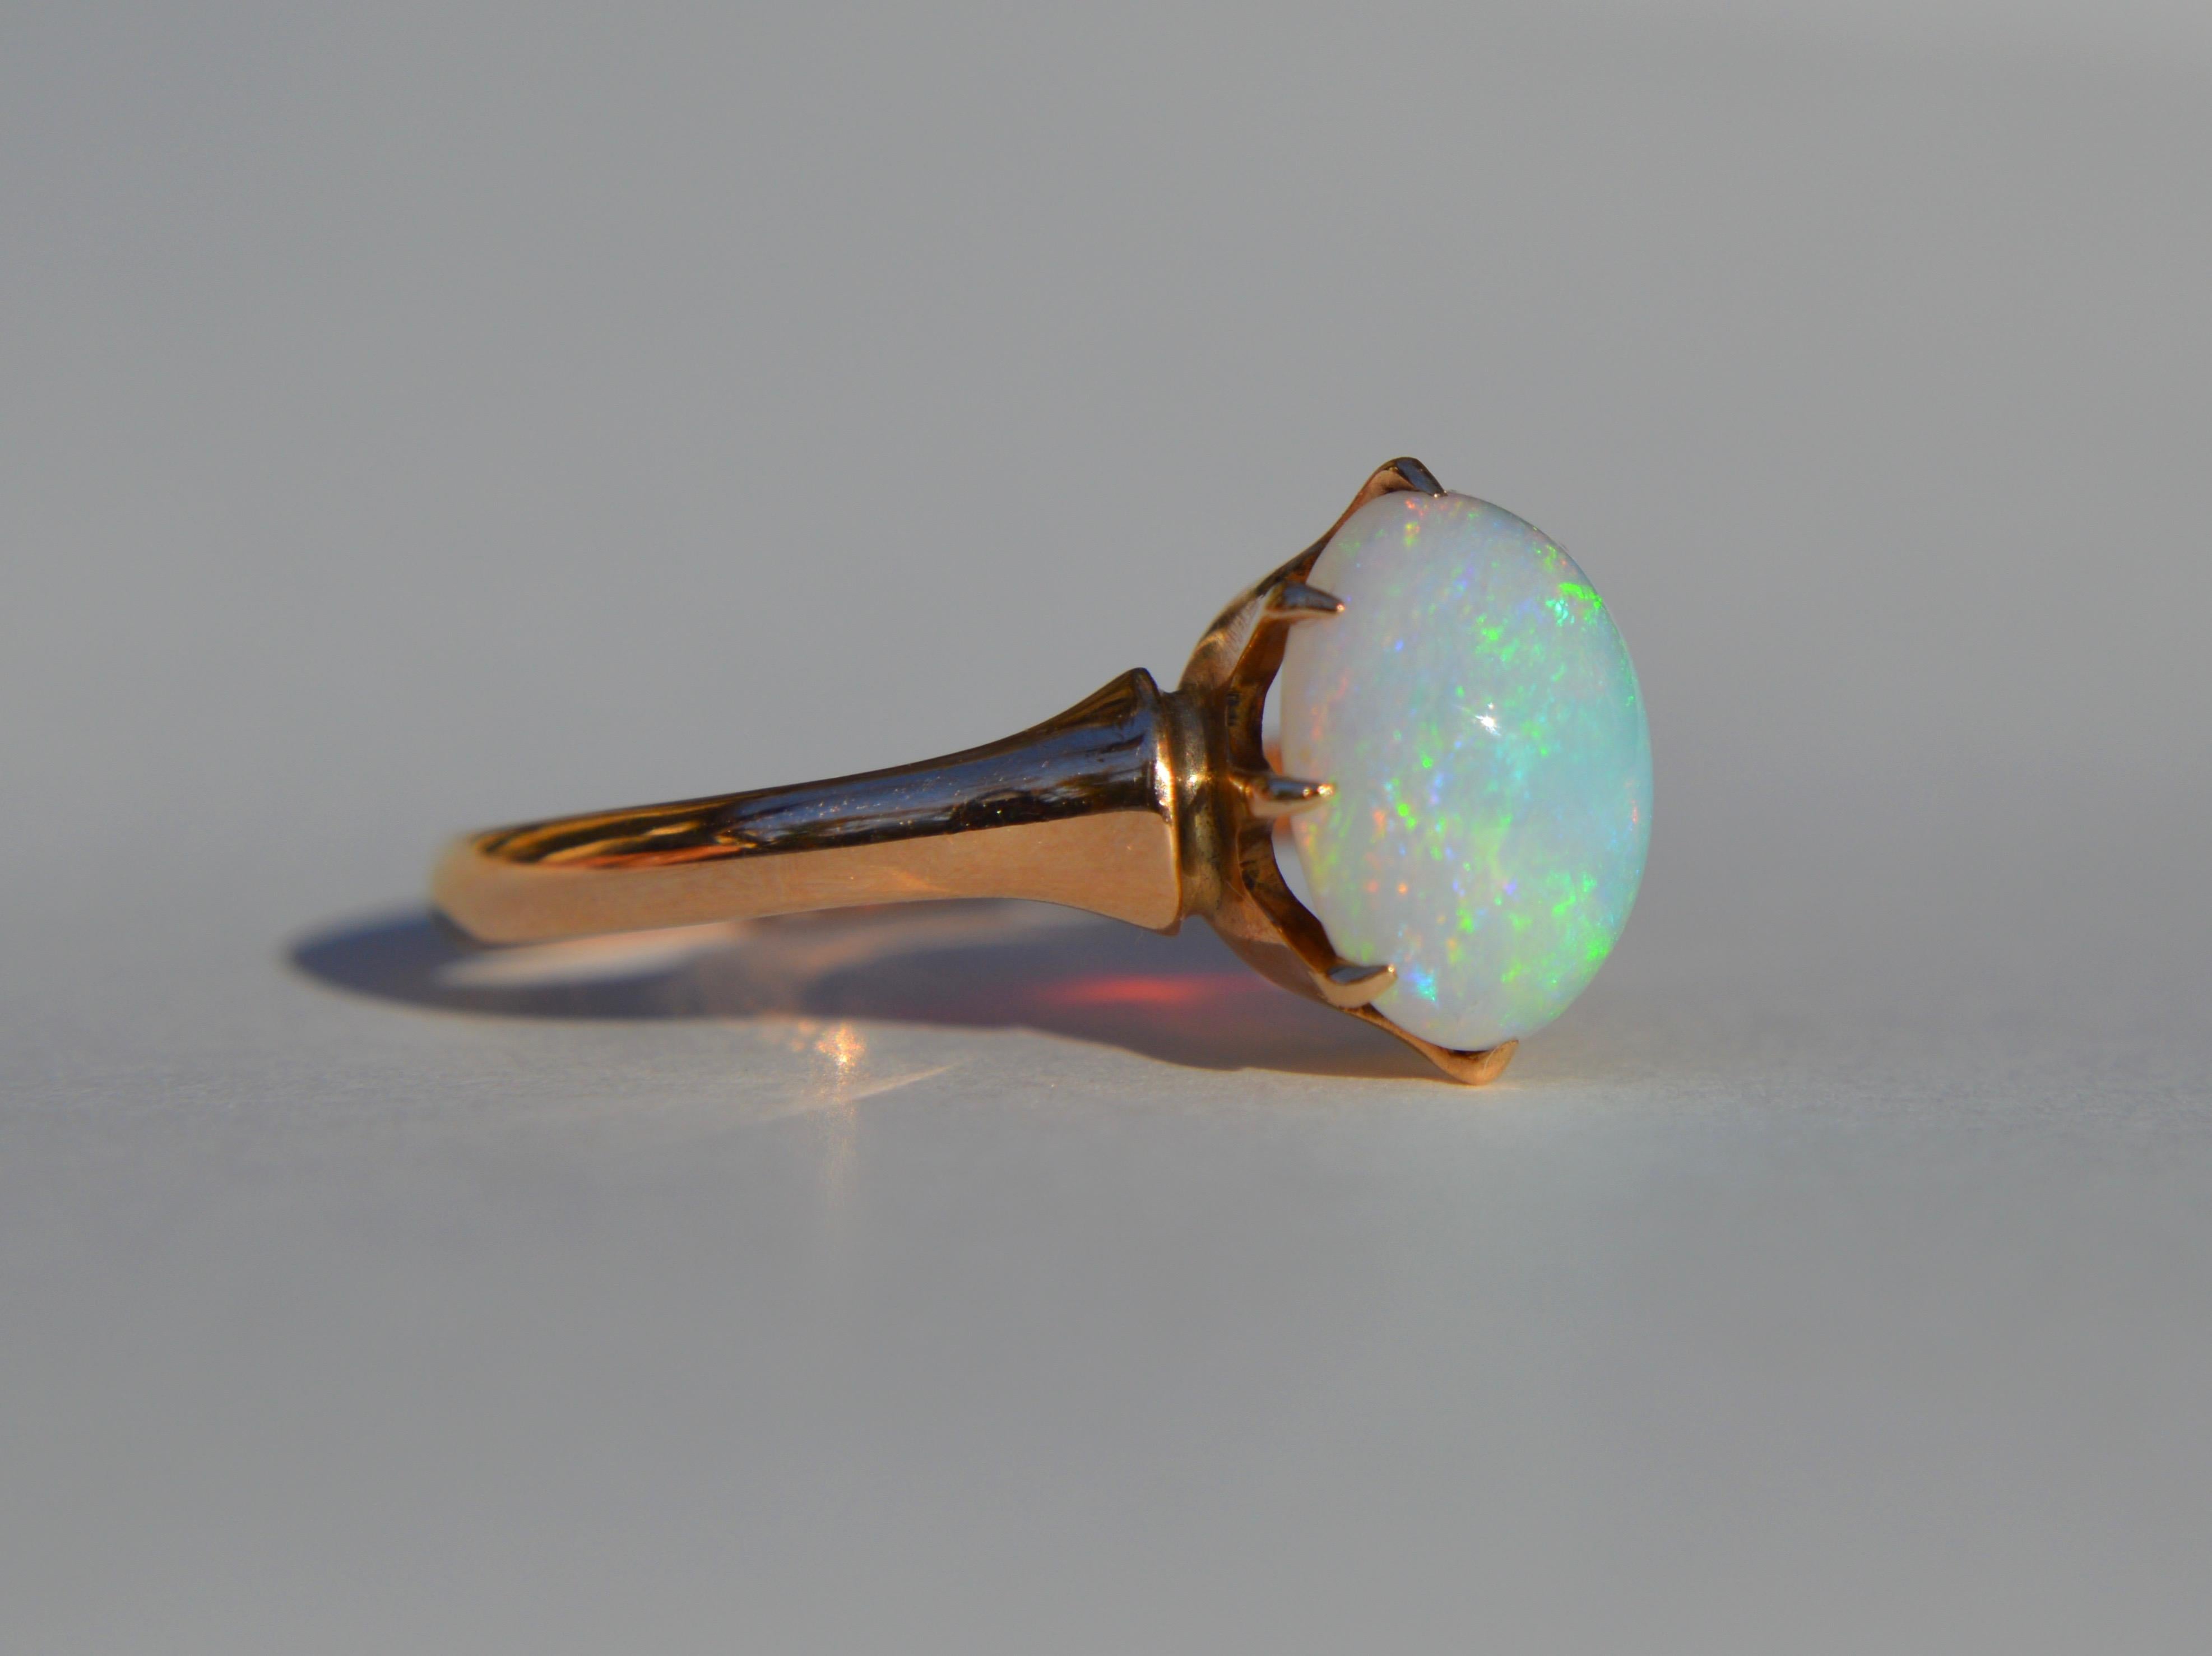 Beautiful vintage circa 1950s midcentury Australian 2.54 carat opal cabochon ring in solid 10K rose gold. In very good condition. No scratches or wear to the opal. Weighs 2.4 grams. Size 7.75, can easily be resized by a jeweler. Opal measures